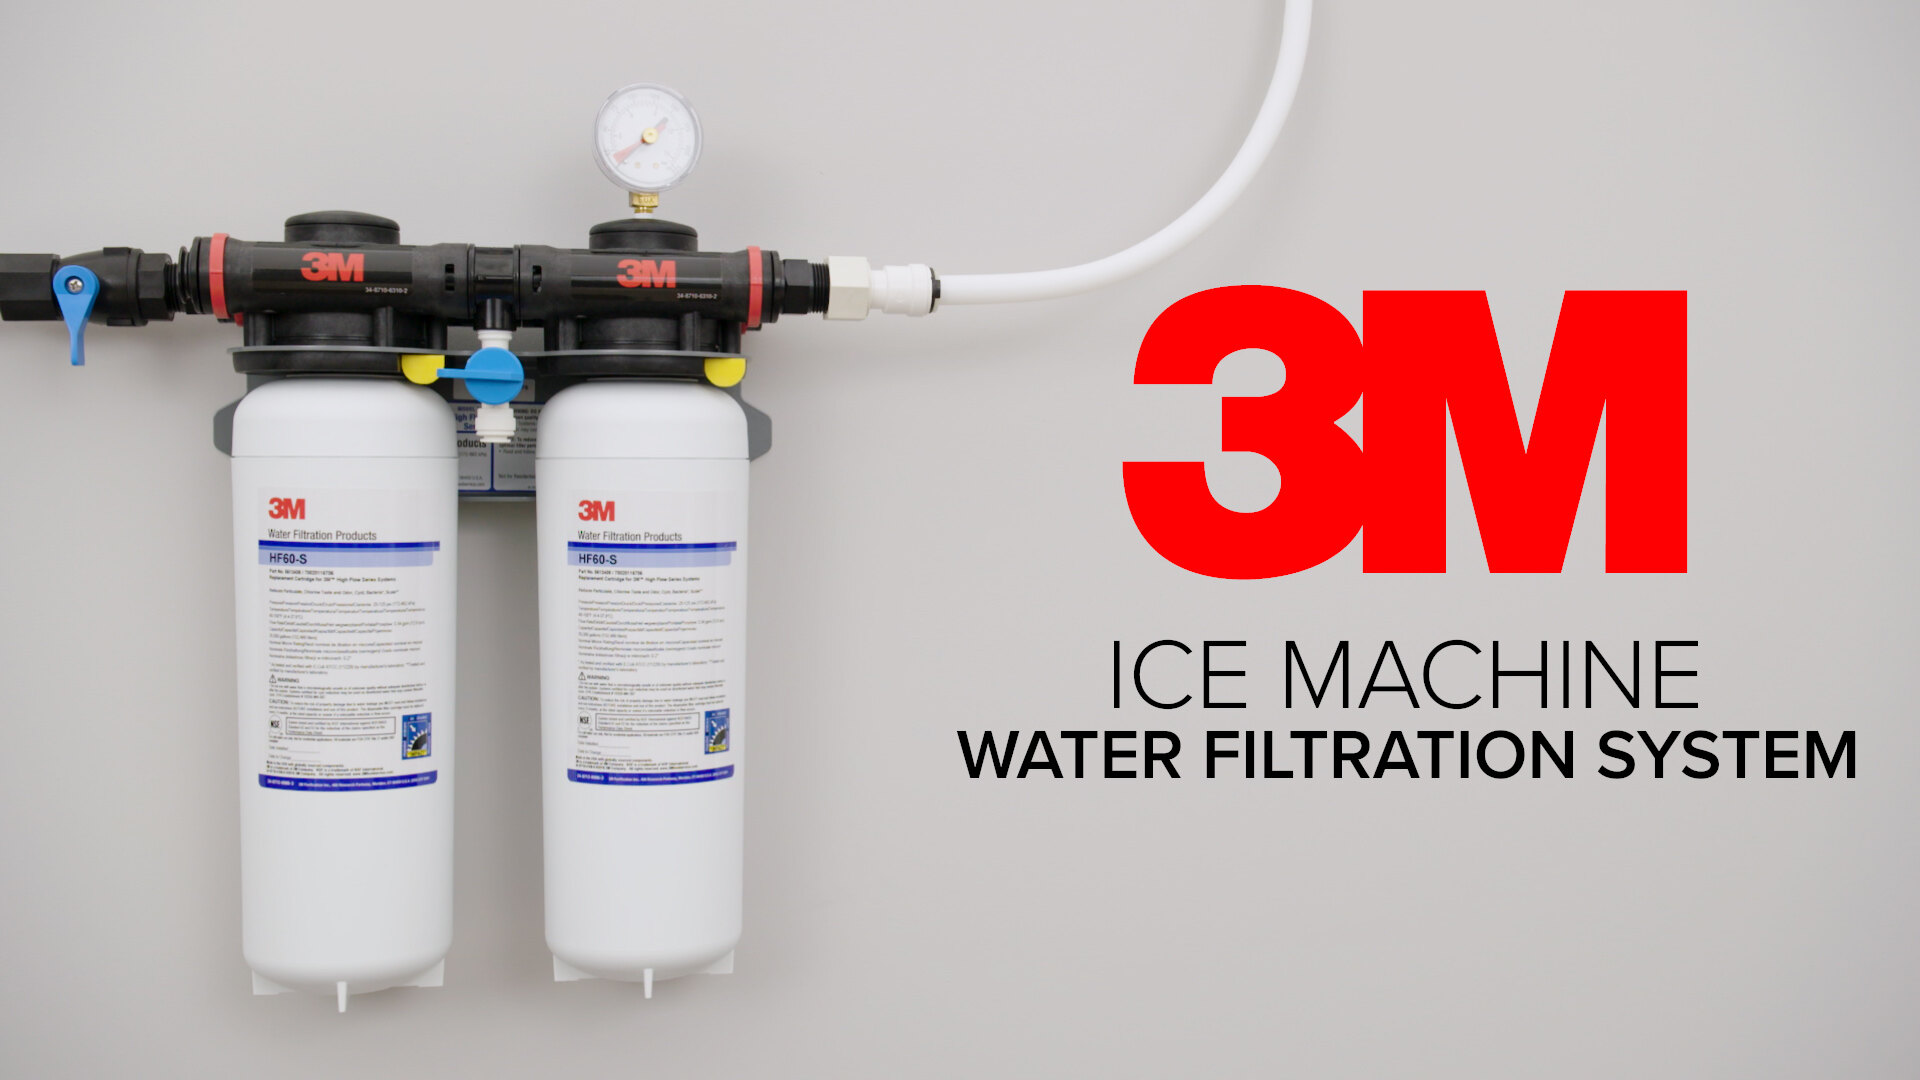 3M ICE265-S Ice/Coffee Filter System